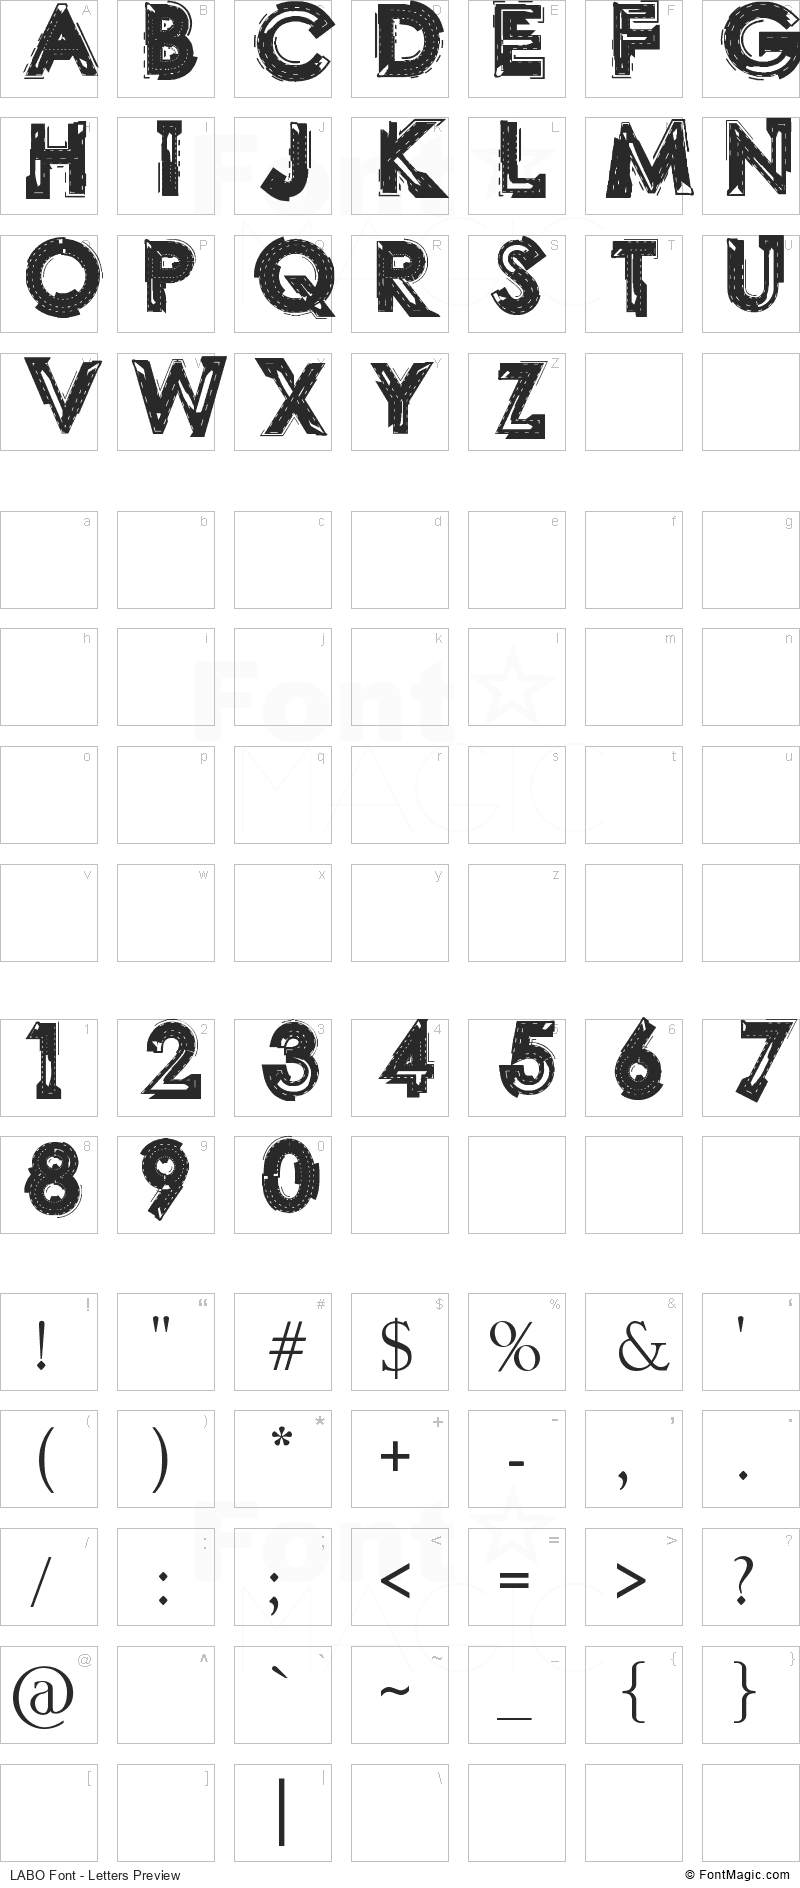 LABO Font - All Latters Preview Chart